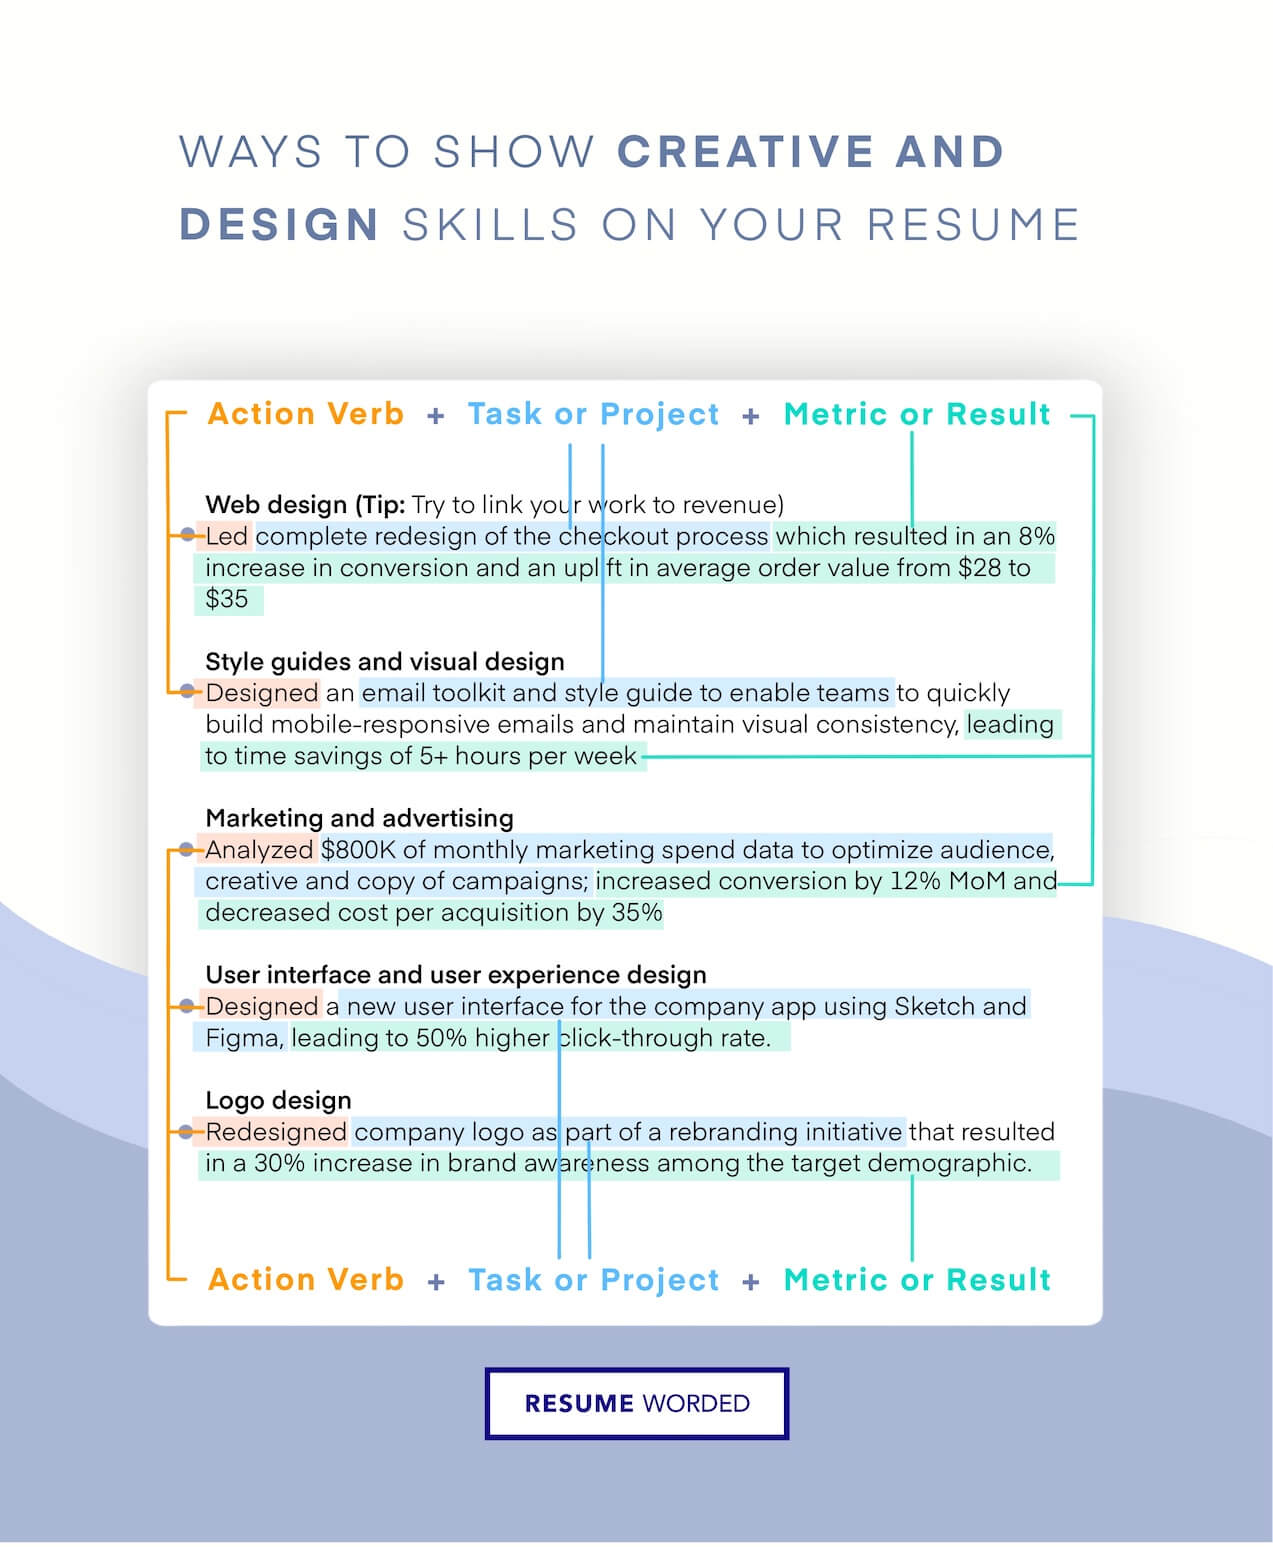 Illustrate your communication skills with examples - Benefits Administrator Resume